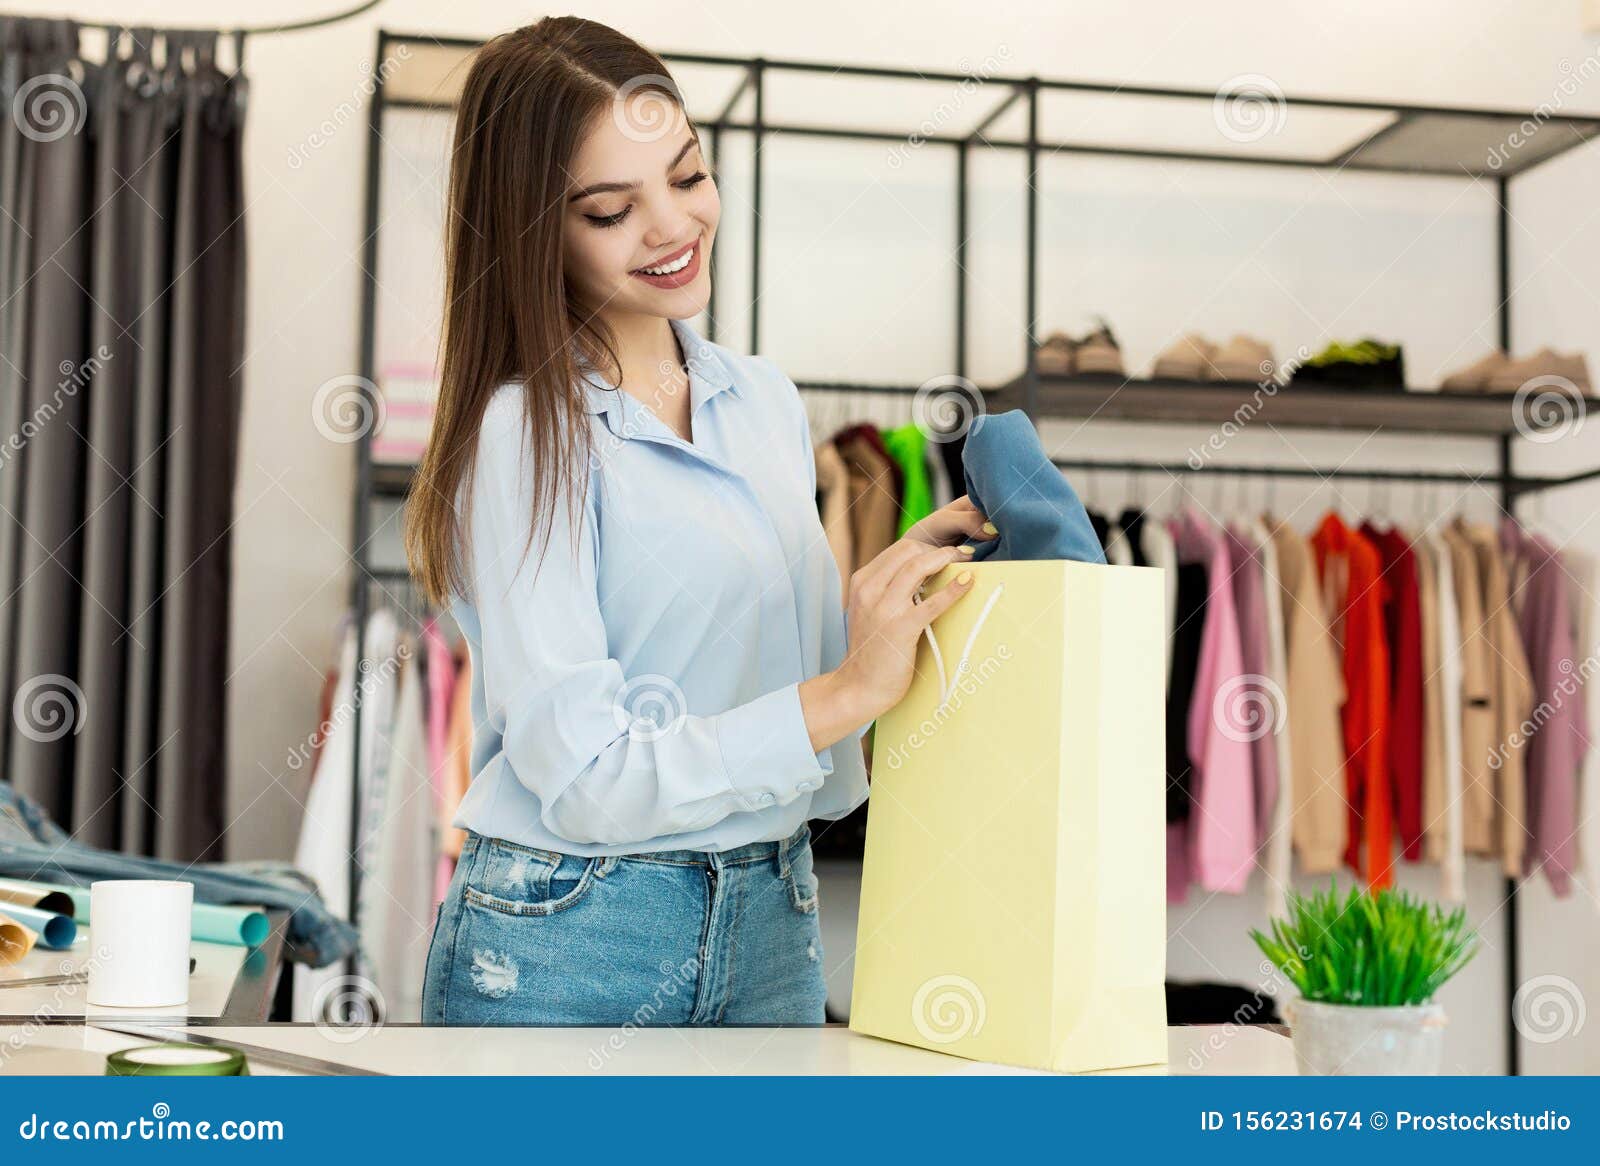 Cheerful Young Woman Buying Clothes in Fashionable Design Studio Stock ...